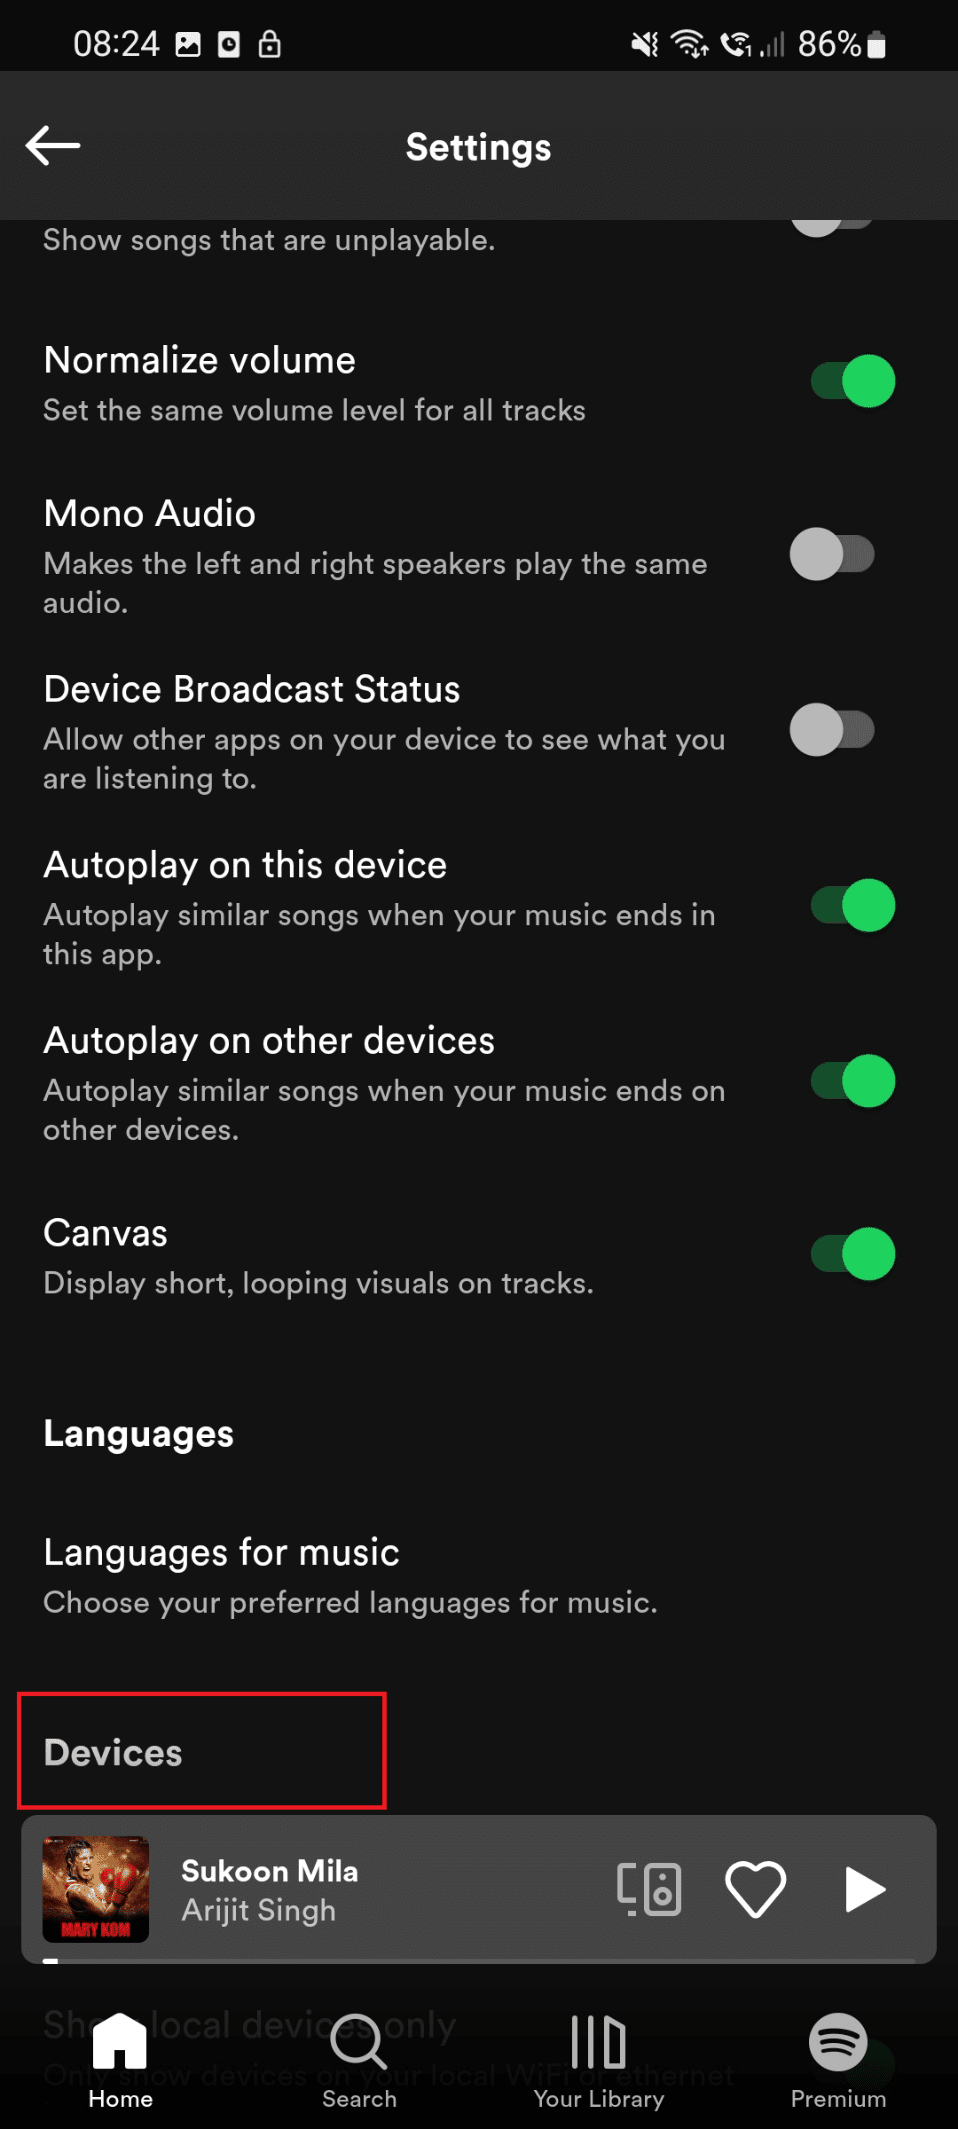 devices option